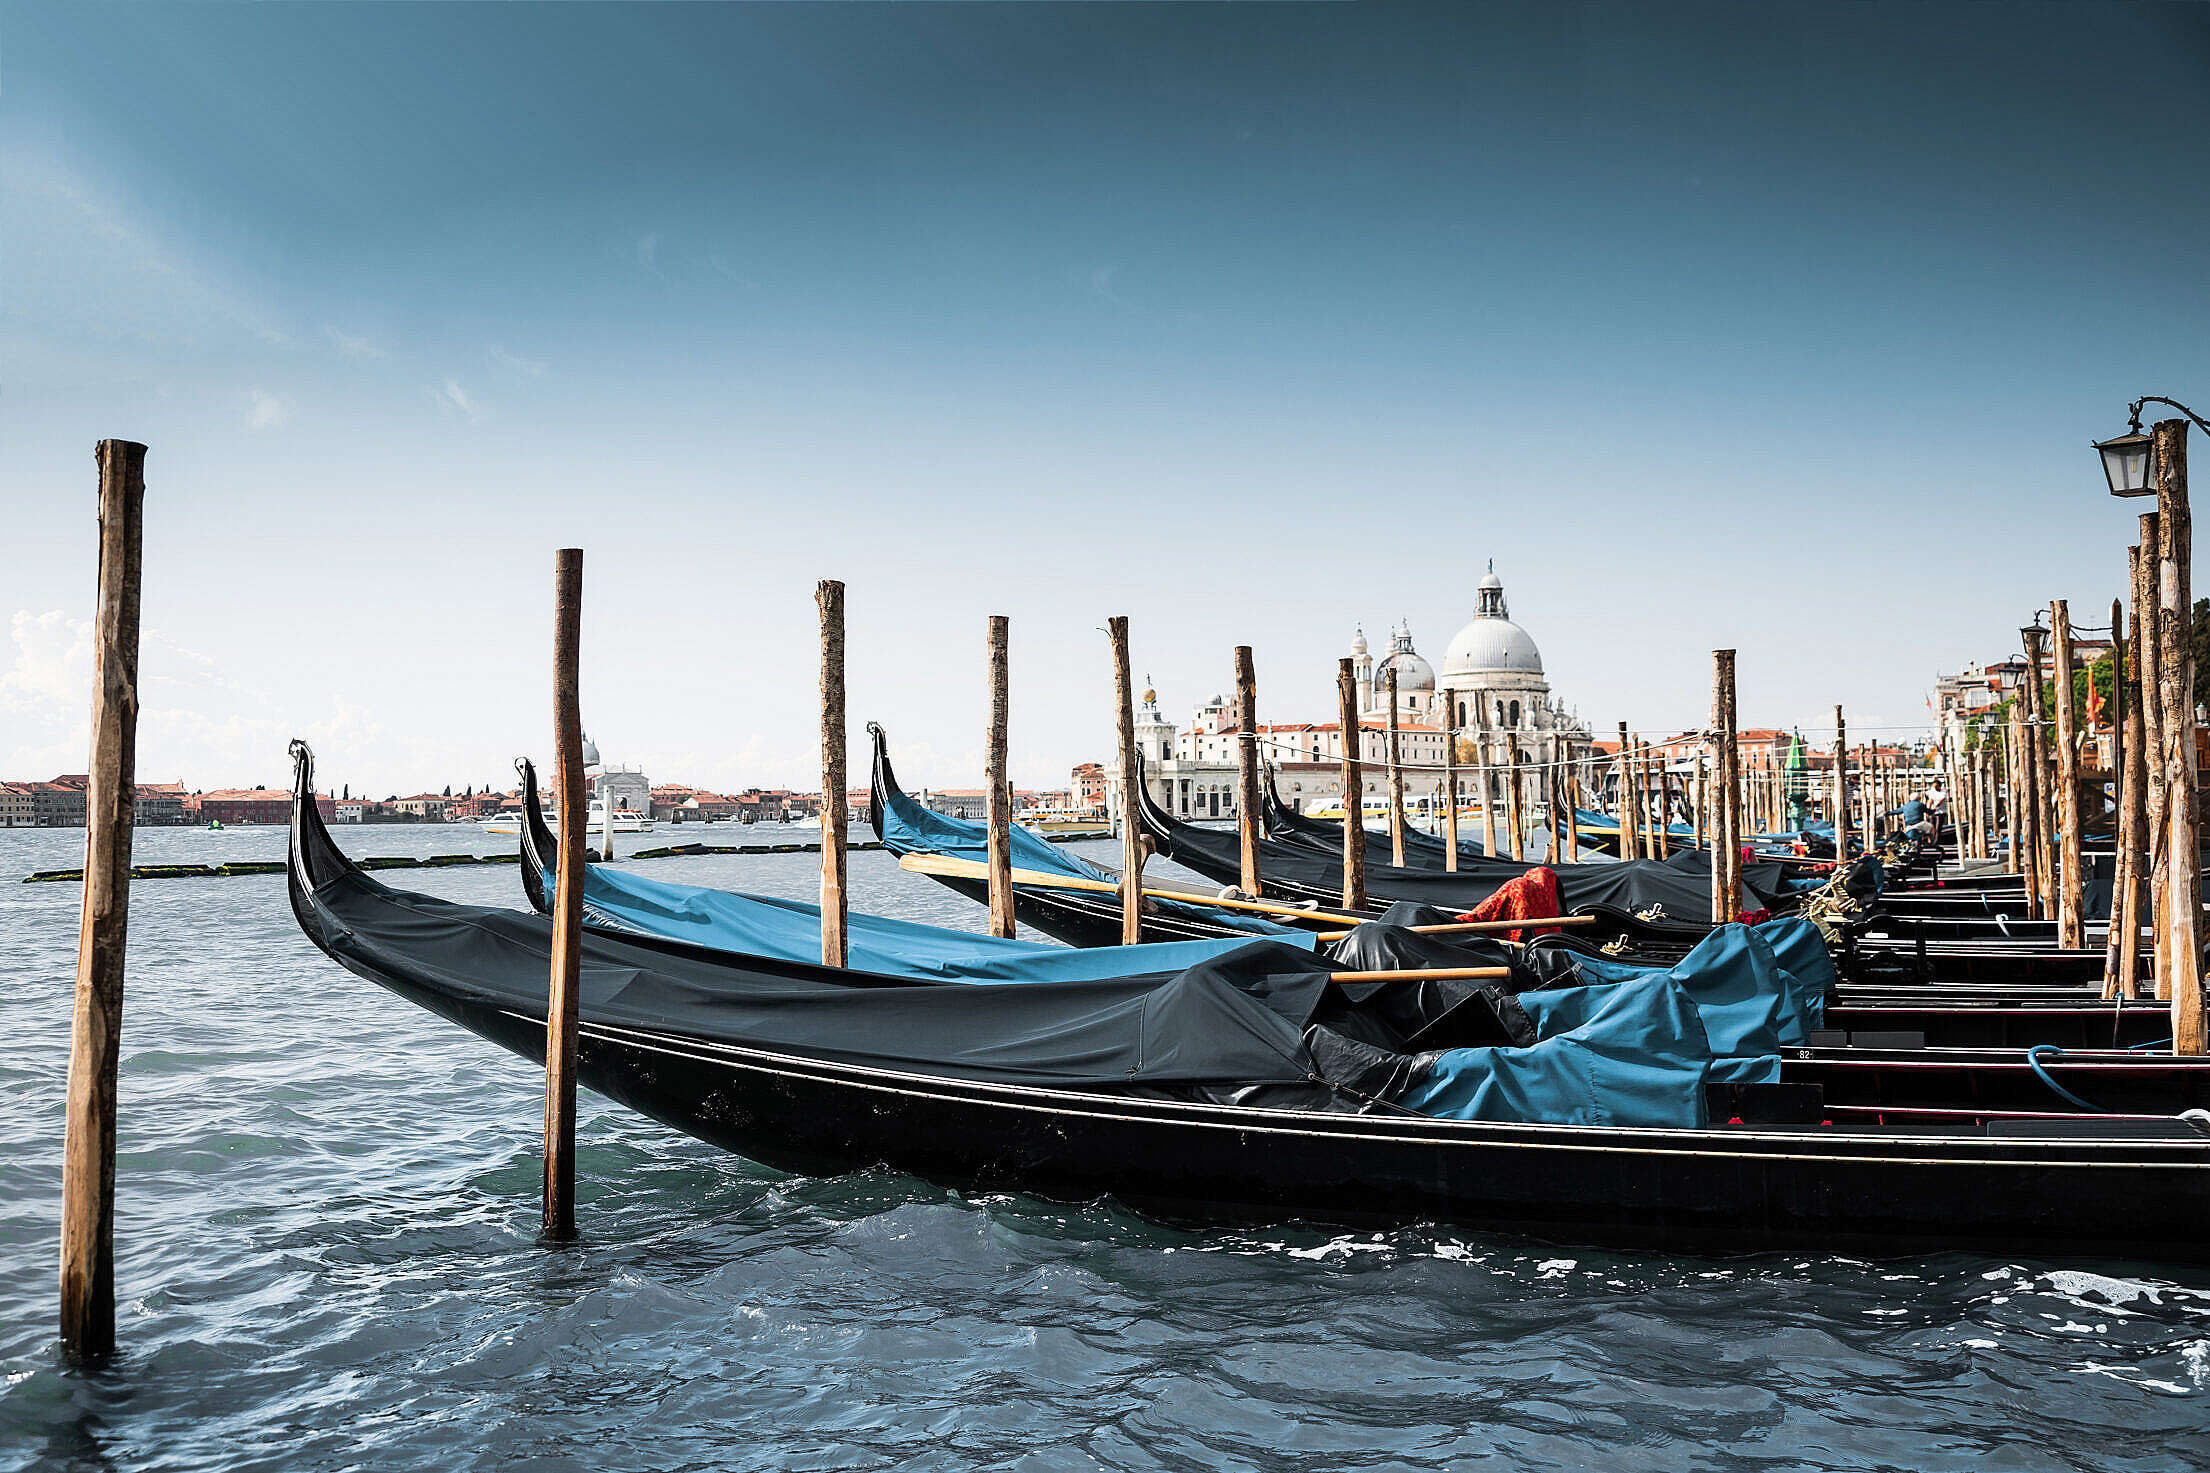 Gondola: Boats in Venice at their moorings, Italy, Water transport. 2210x1480 HD Wallpaper.